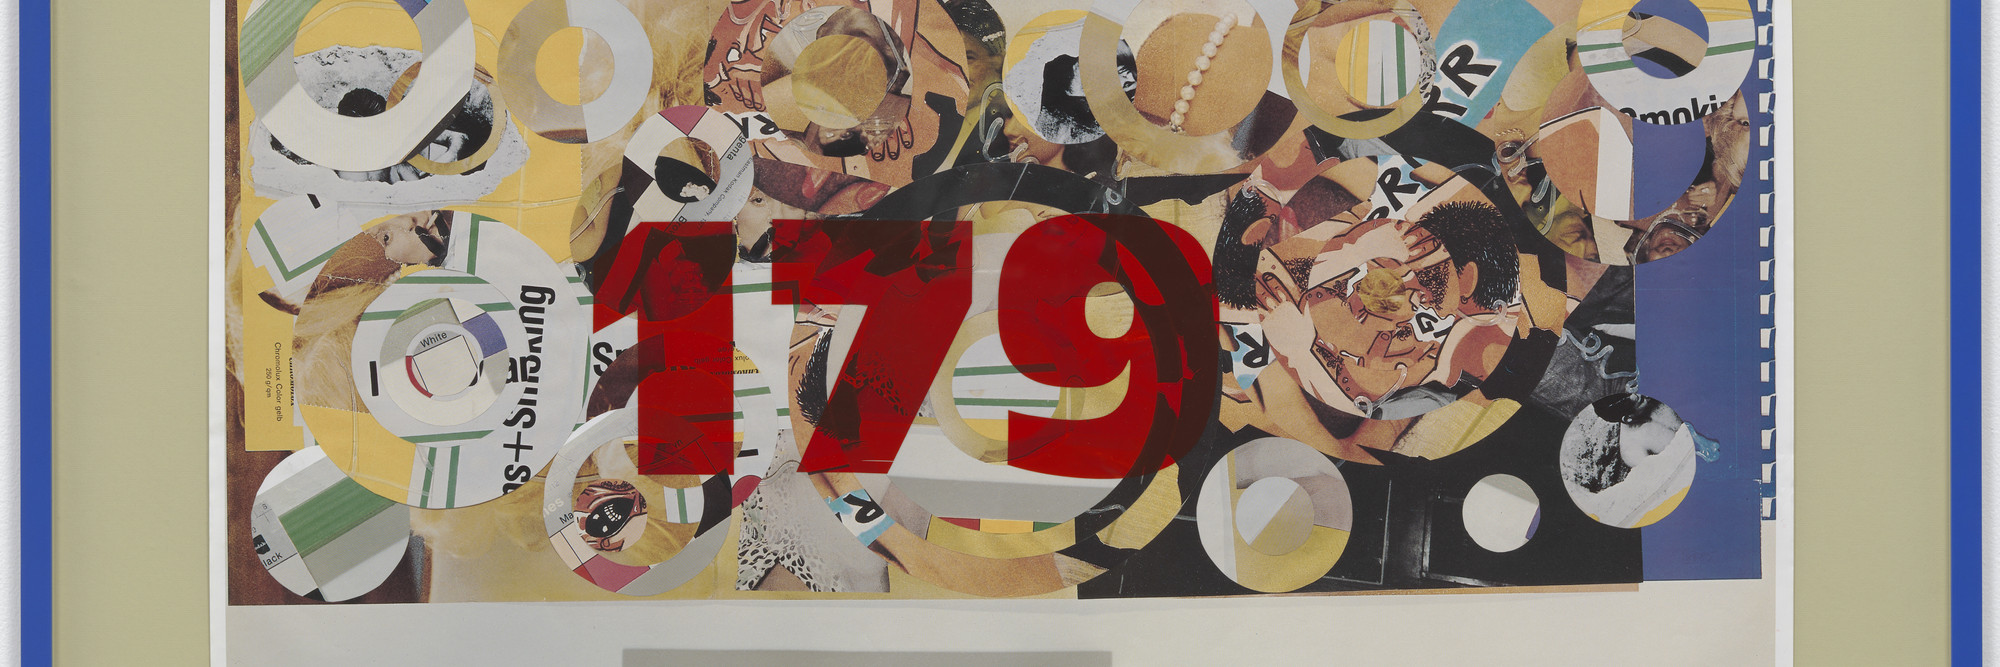 Martin Kippenberger. Untitled. 1989. Cut-and-pasted-printed paper and cut-and-pasted synthetic sheeting on photo offset lithograph in artist’s frame, 21 7/8 × 39 1/2ʺ (55.5 × 99.8 cm). Gift of Walter Bareiss. © 2016 Estate Martin Kippenberger, Galerie Gisela Capitain, Cologne